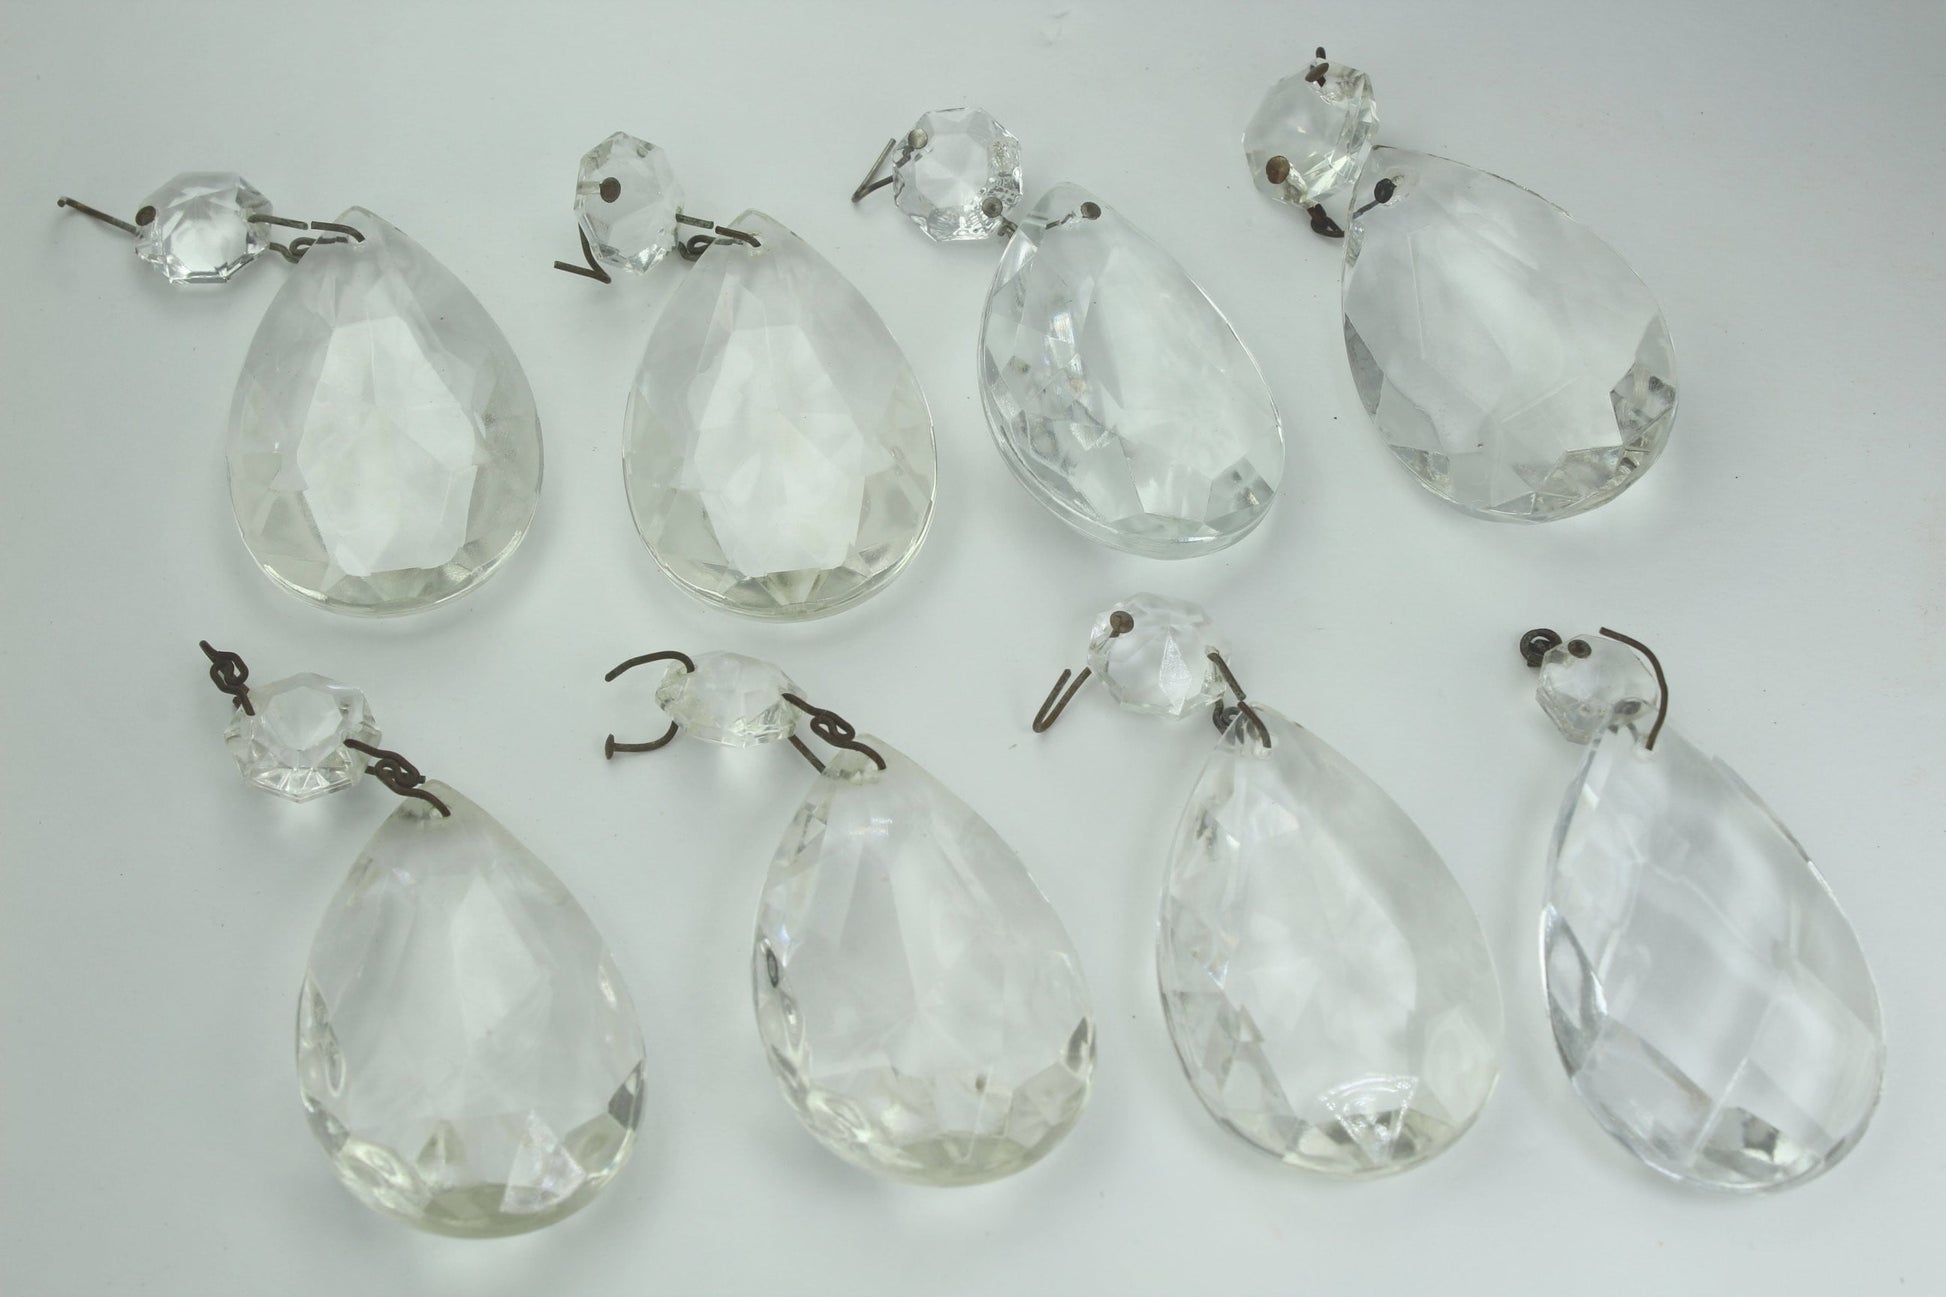 Vintage Prisms Glass Crystals 8 Pendelogue Lot 2" Rosette DIY Ornaments Jewelry high quality